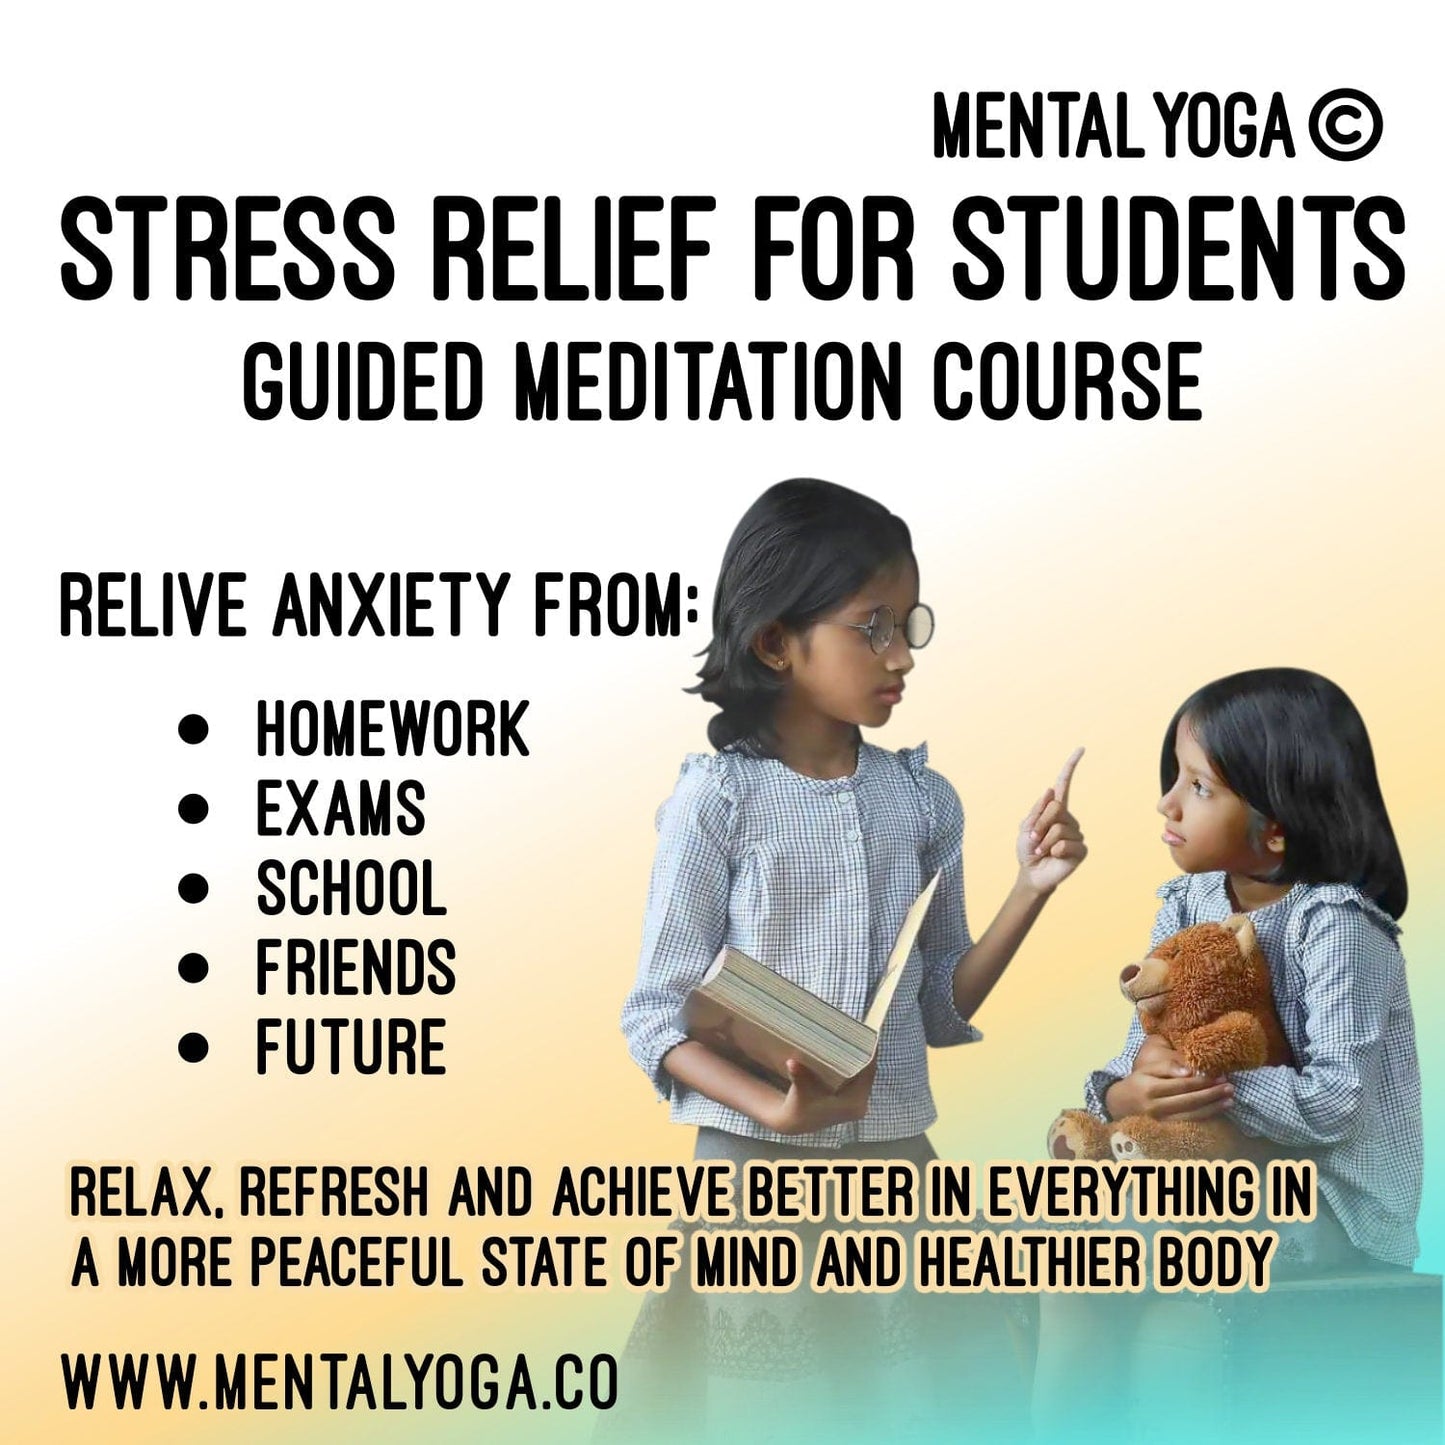 Stress Relief For Students - Life coach | Private Coaching and mediation services | Mental Yoga - Mental Yoga